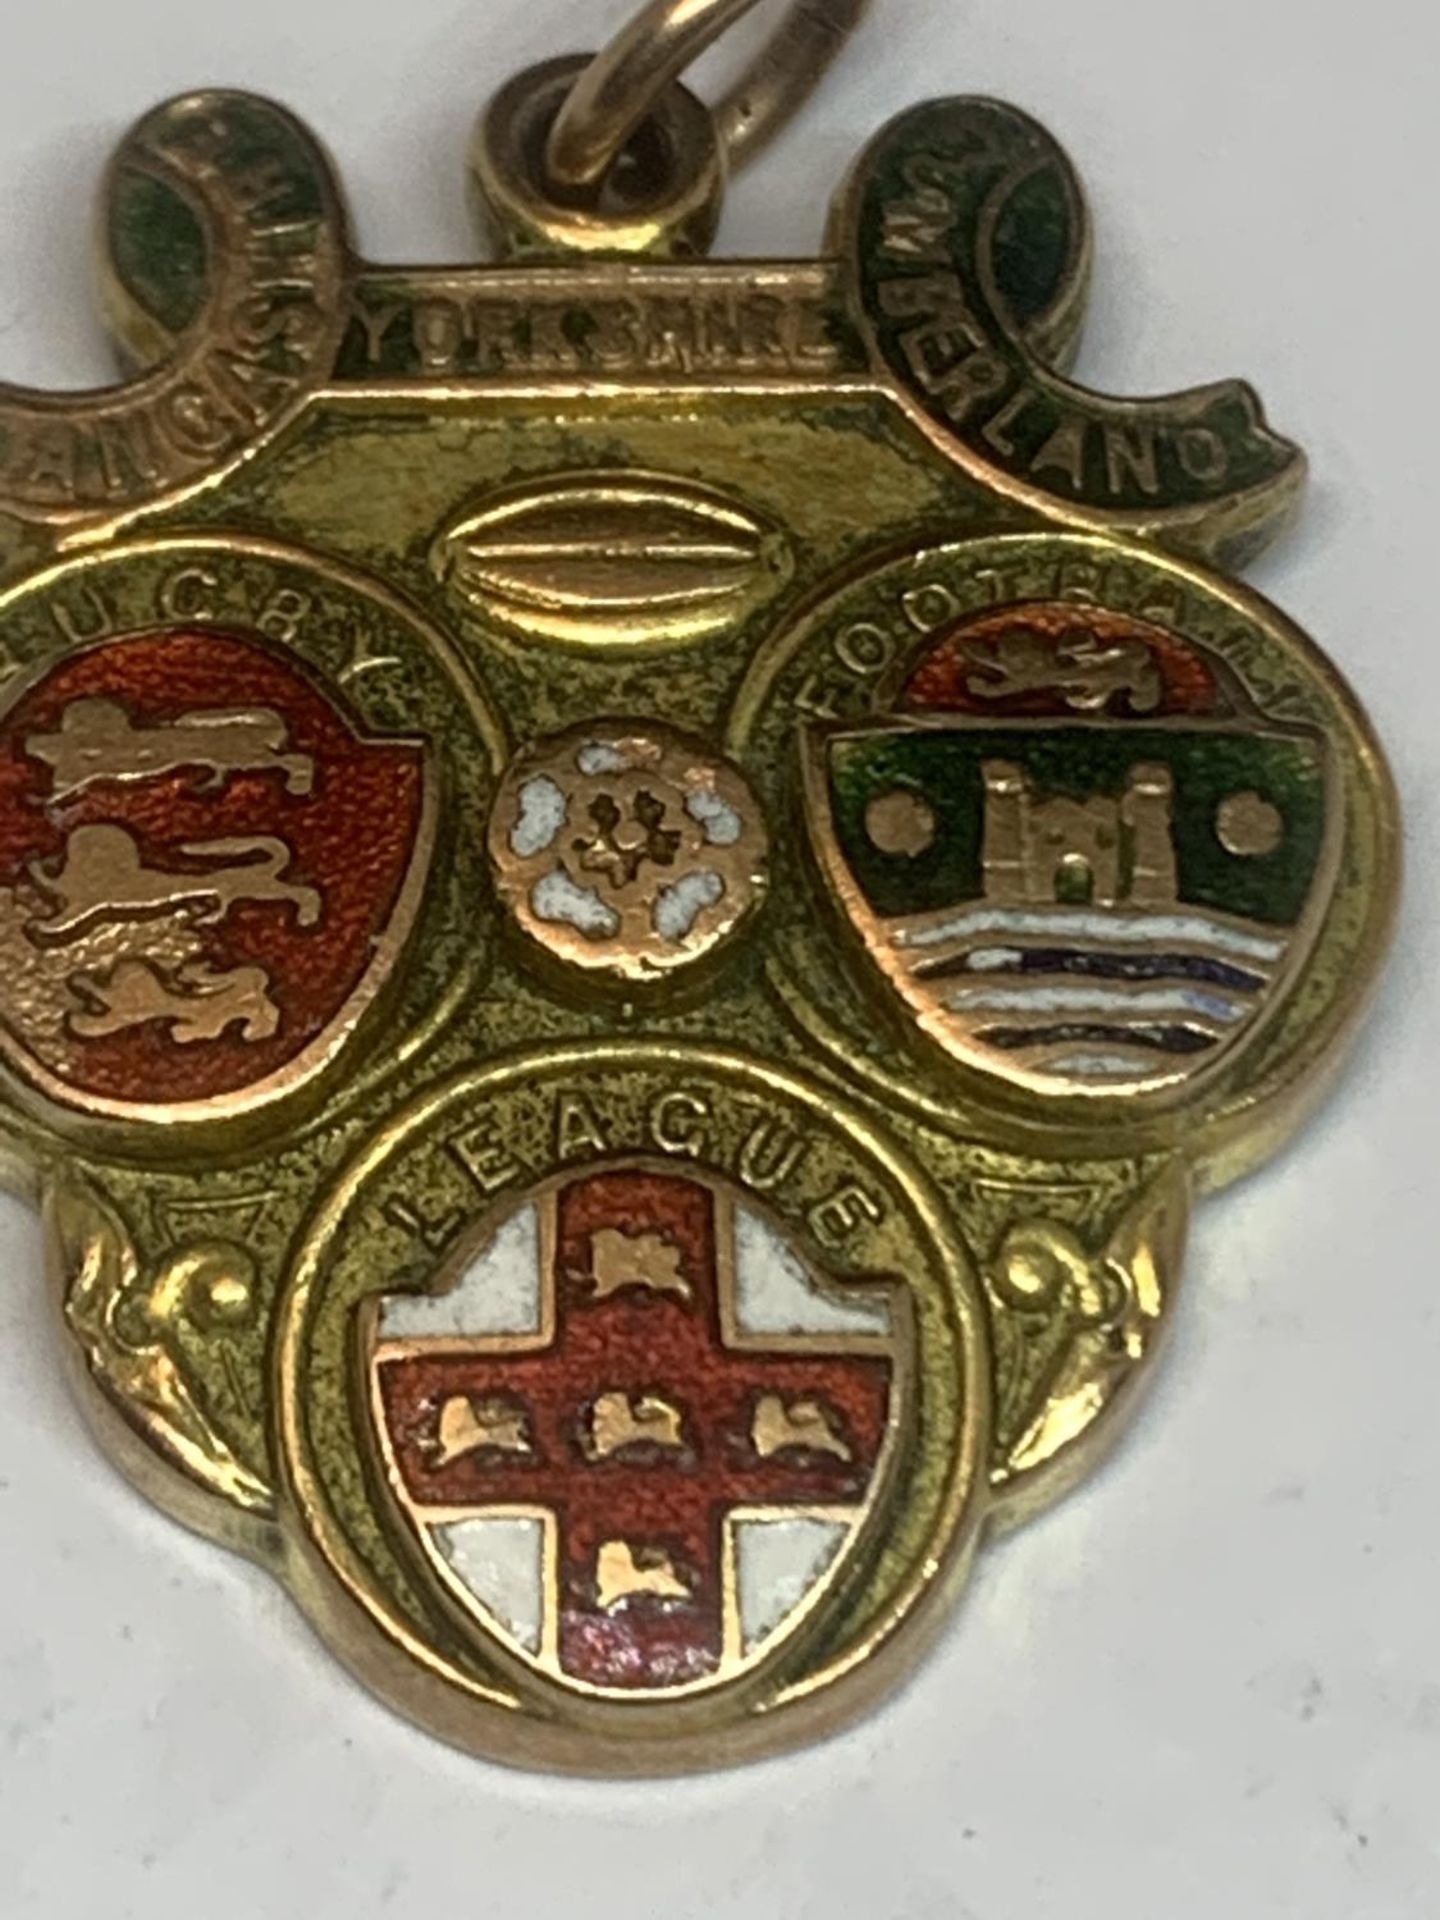 A HALLMARKED 9 CARAT GOLD LANCASHIRE, YORKSHIRE, CUMBERLAND RUGBY FOOTBALL LEAGUE MEDAL ENGRAVED - Image 3 of 6